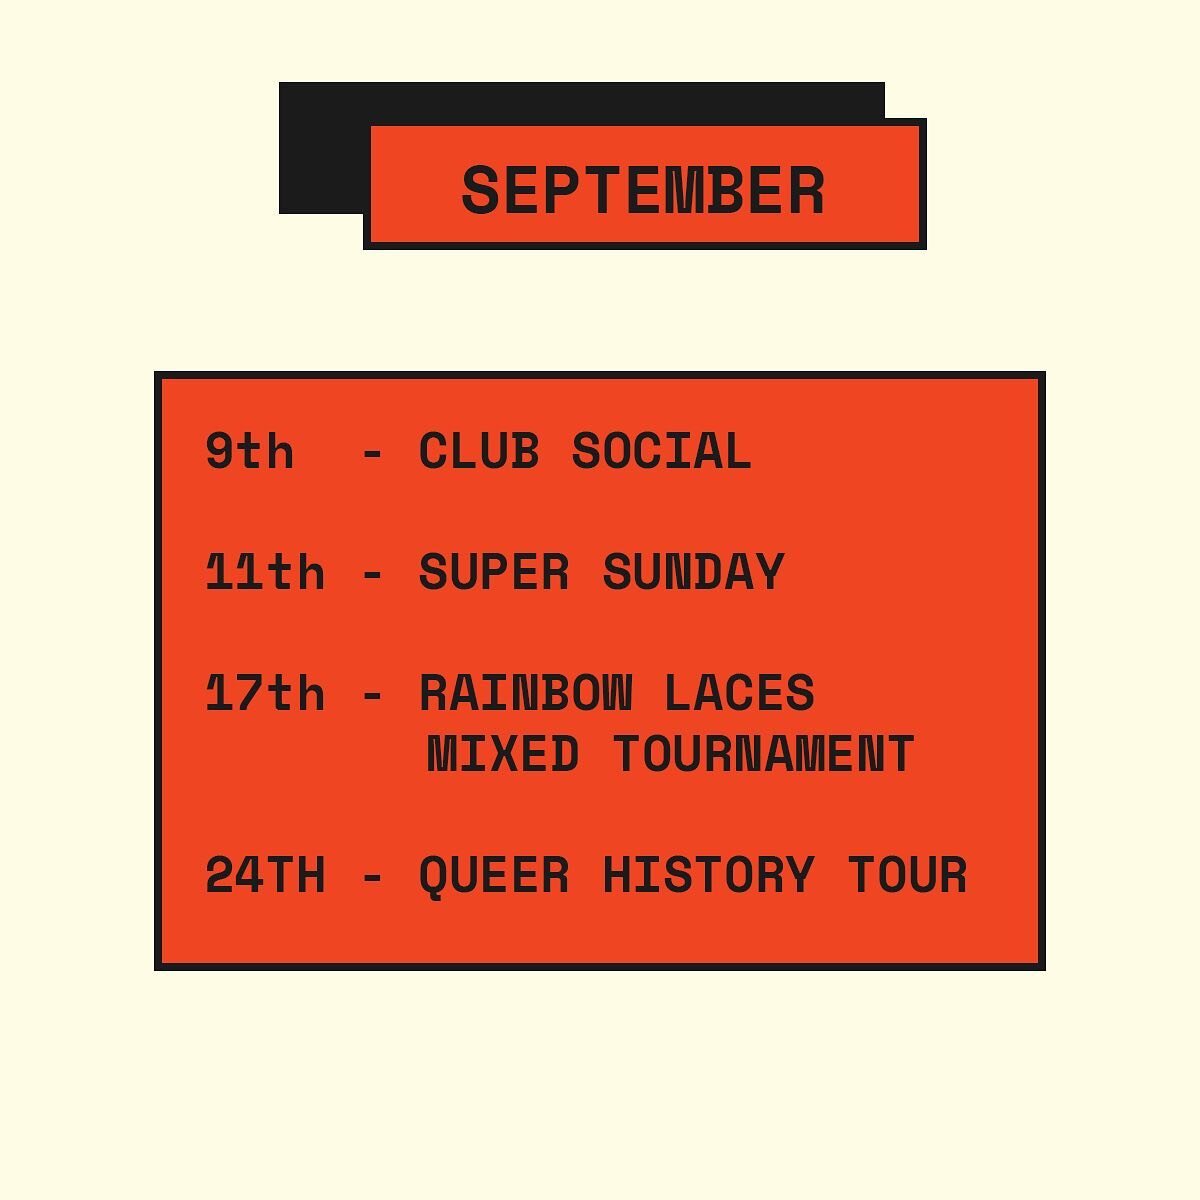 Time to kick off the new season! 

We've got lots going on this month to get excited about and get involved in.

🍻Friday 9th: Club social. We&rsquo;ll be meeting at The Angel at 7.30pm for a start of season get together. All welcome!

⚽️Sunday 11th: